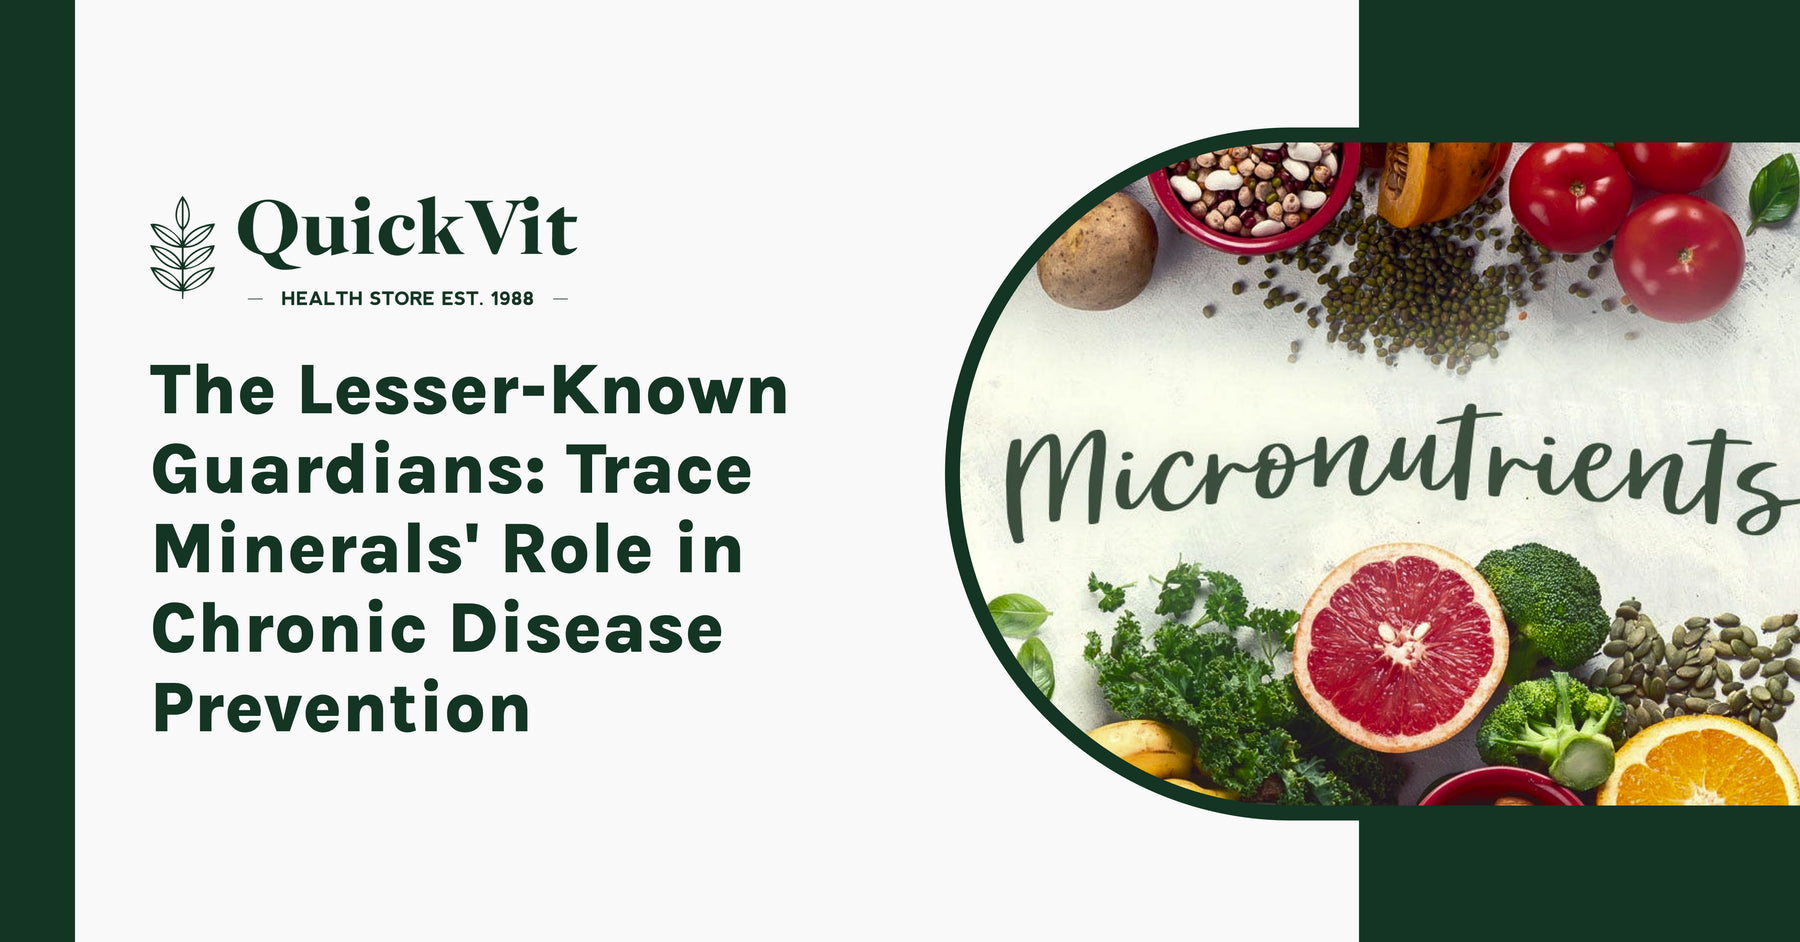 The Lesser-Known Guardians: Trace Minerals' Role in Chronic Disease Prevention